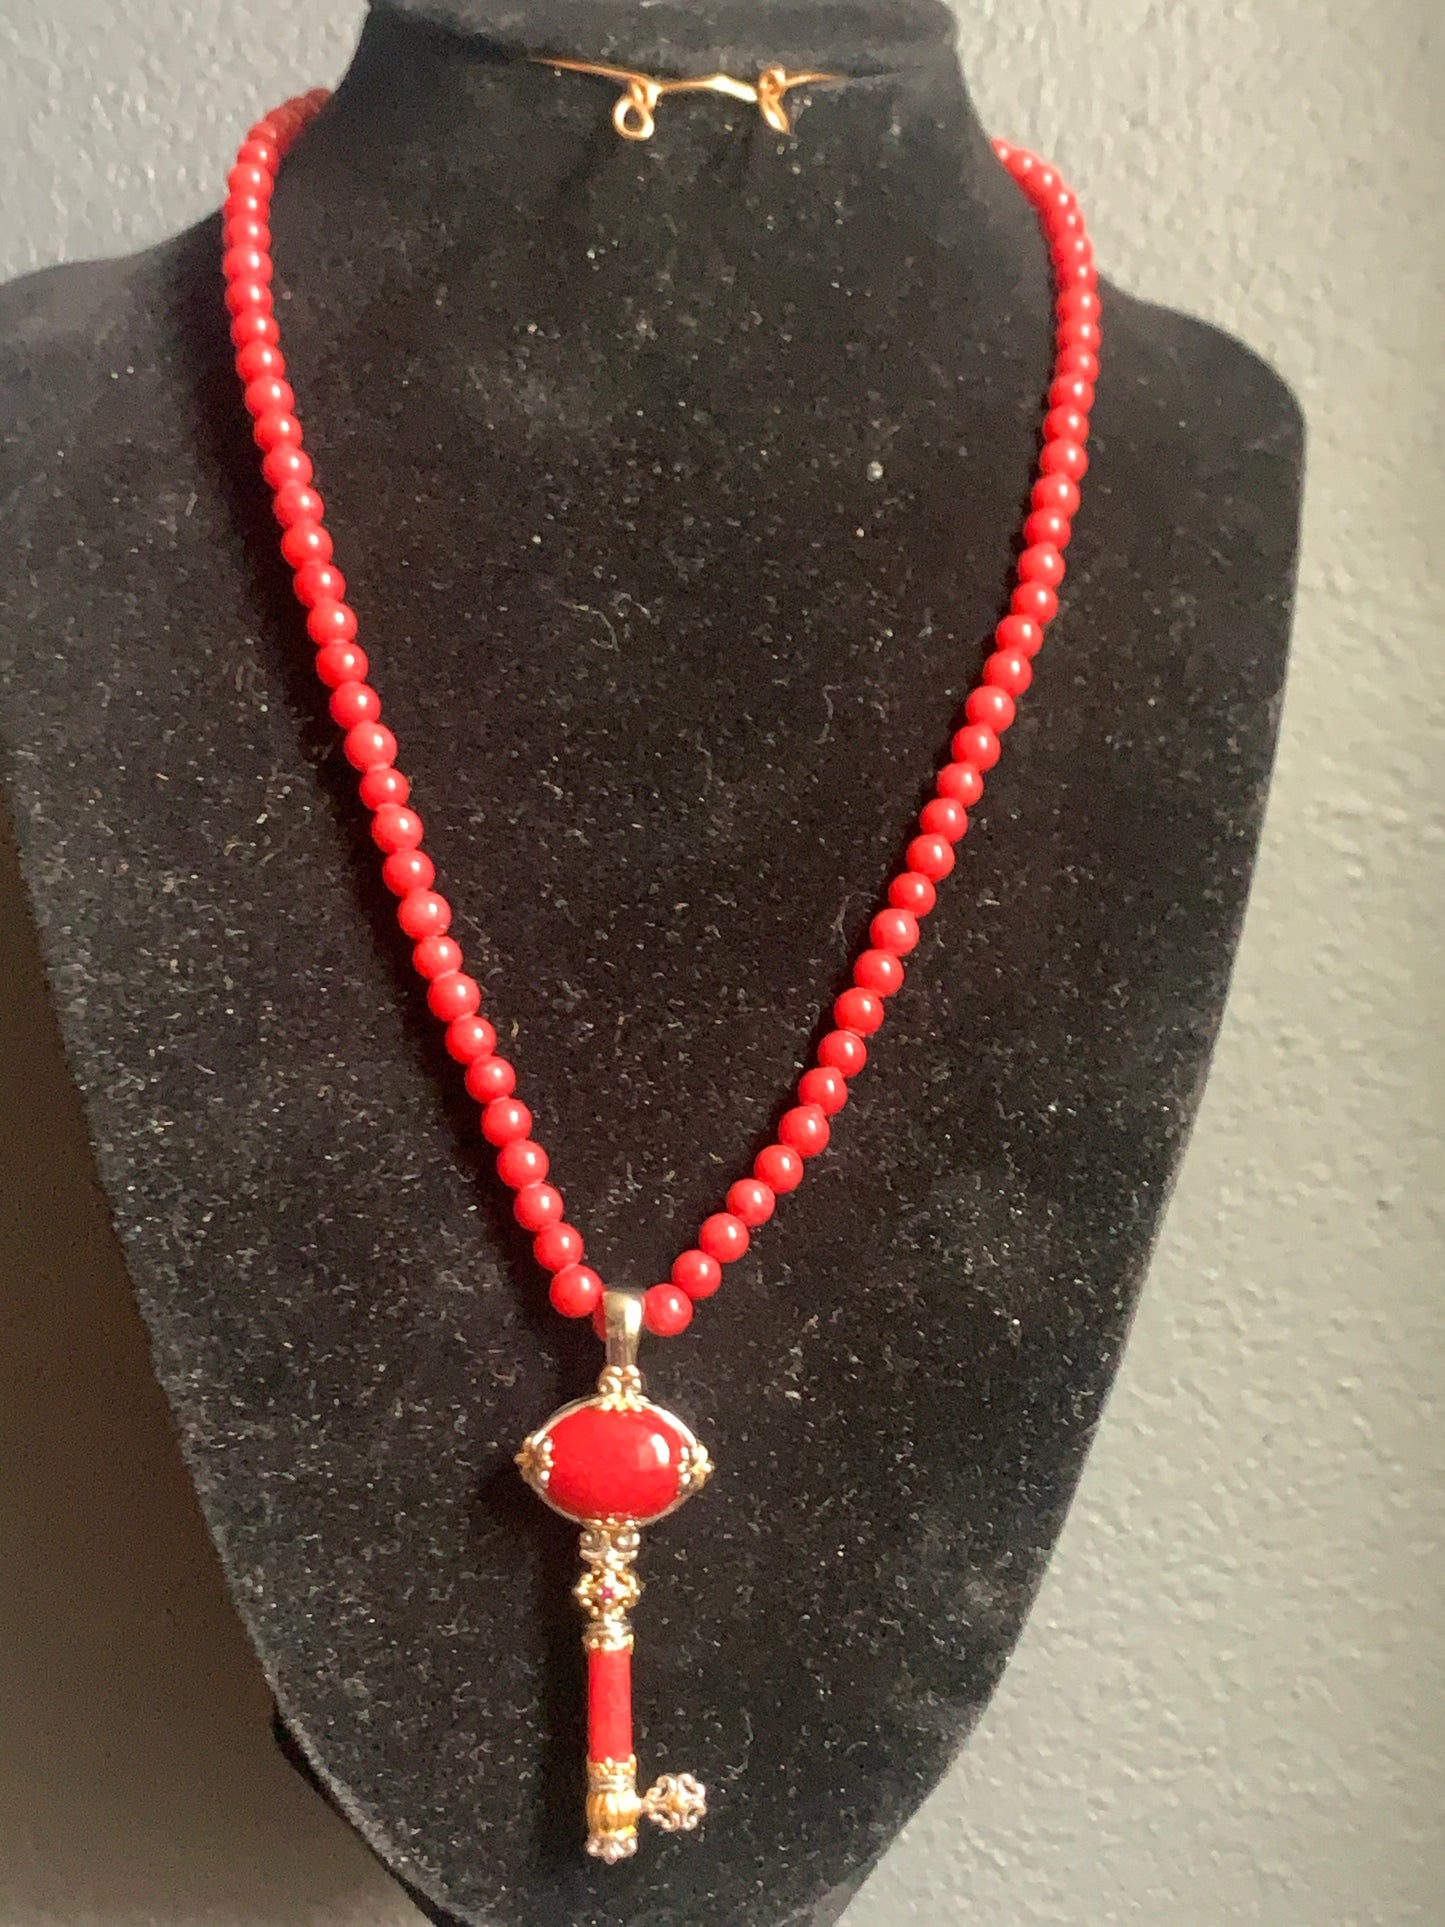 Coral necklace with coral pendant